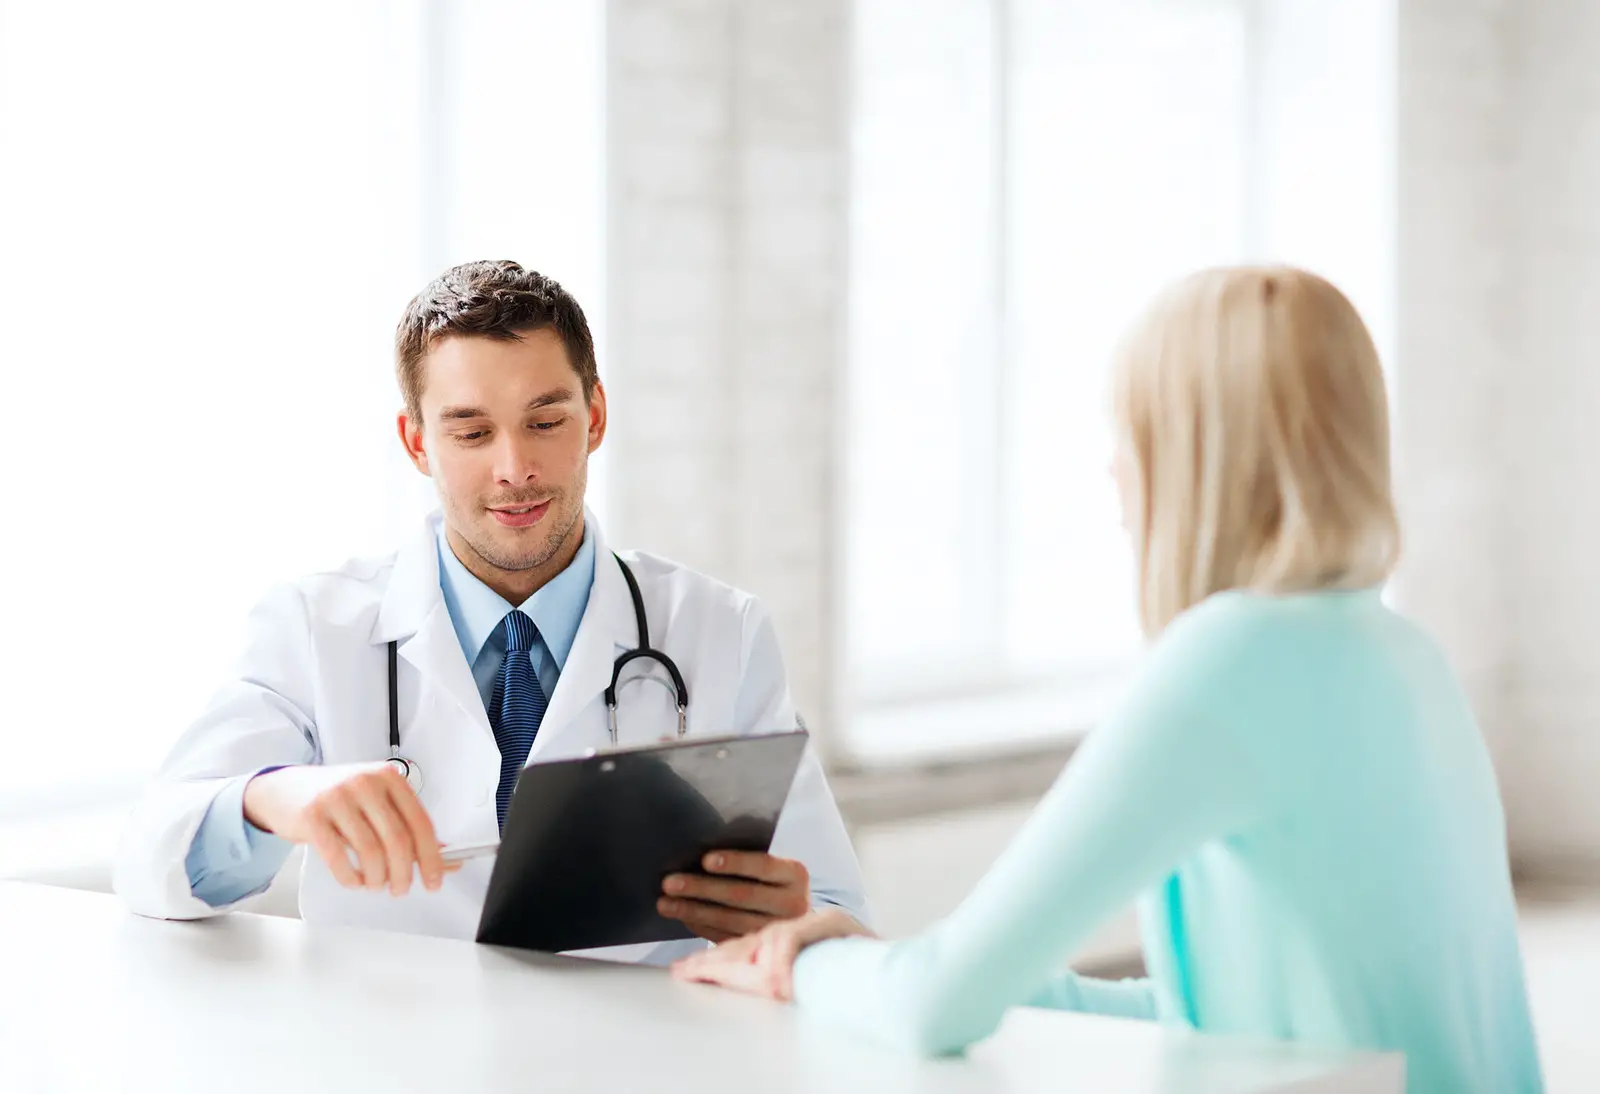 7 Important Questions For Your Doctor Before Going For A Health Checkup